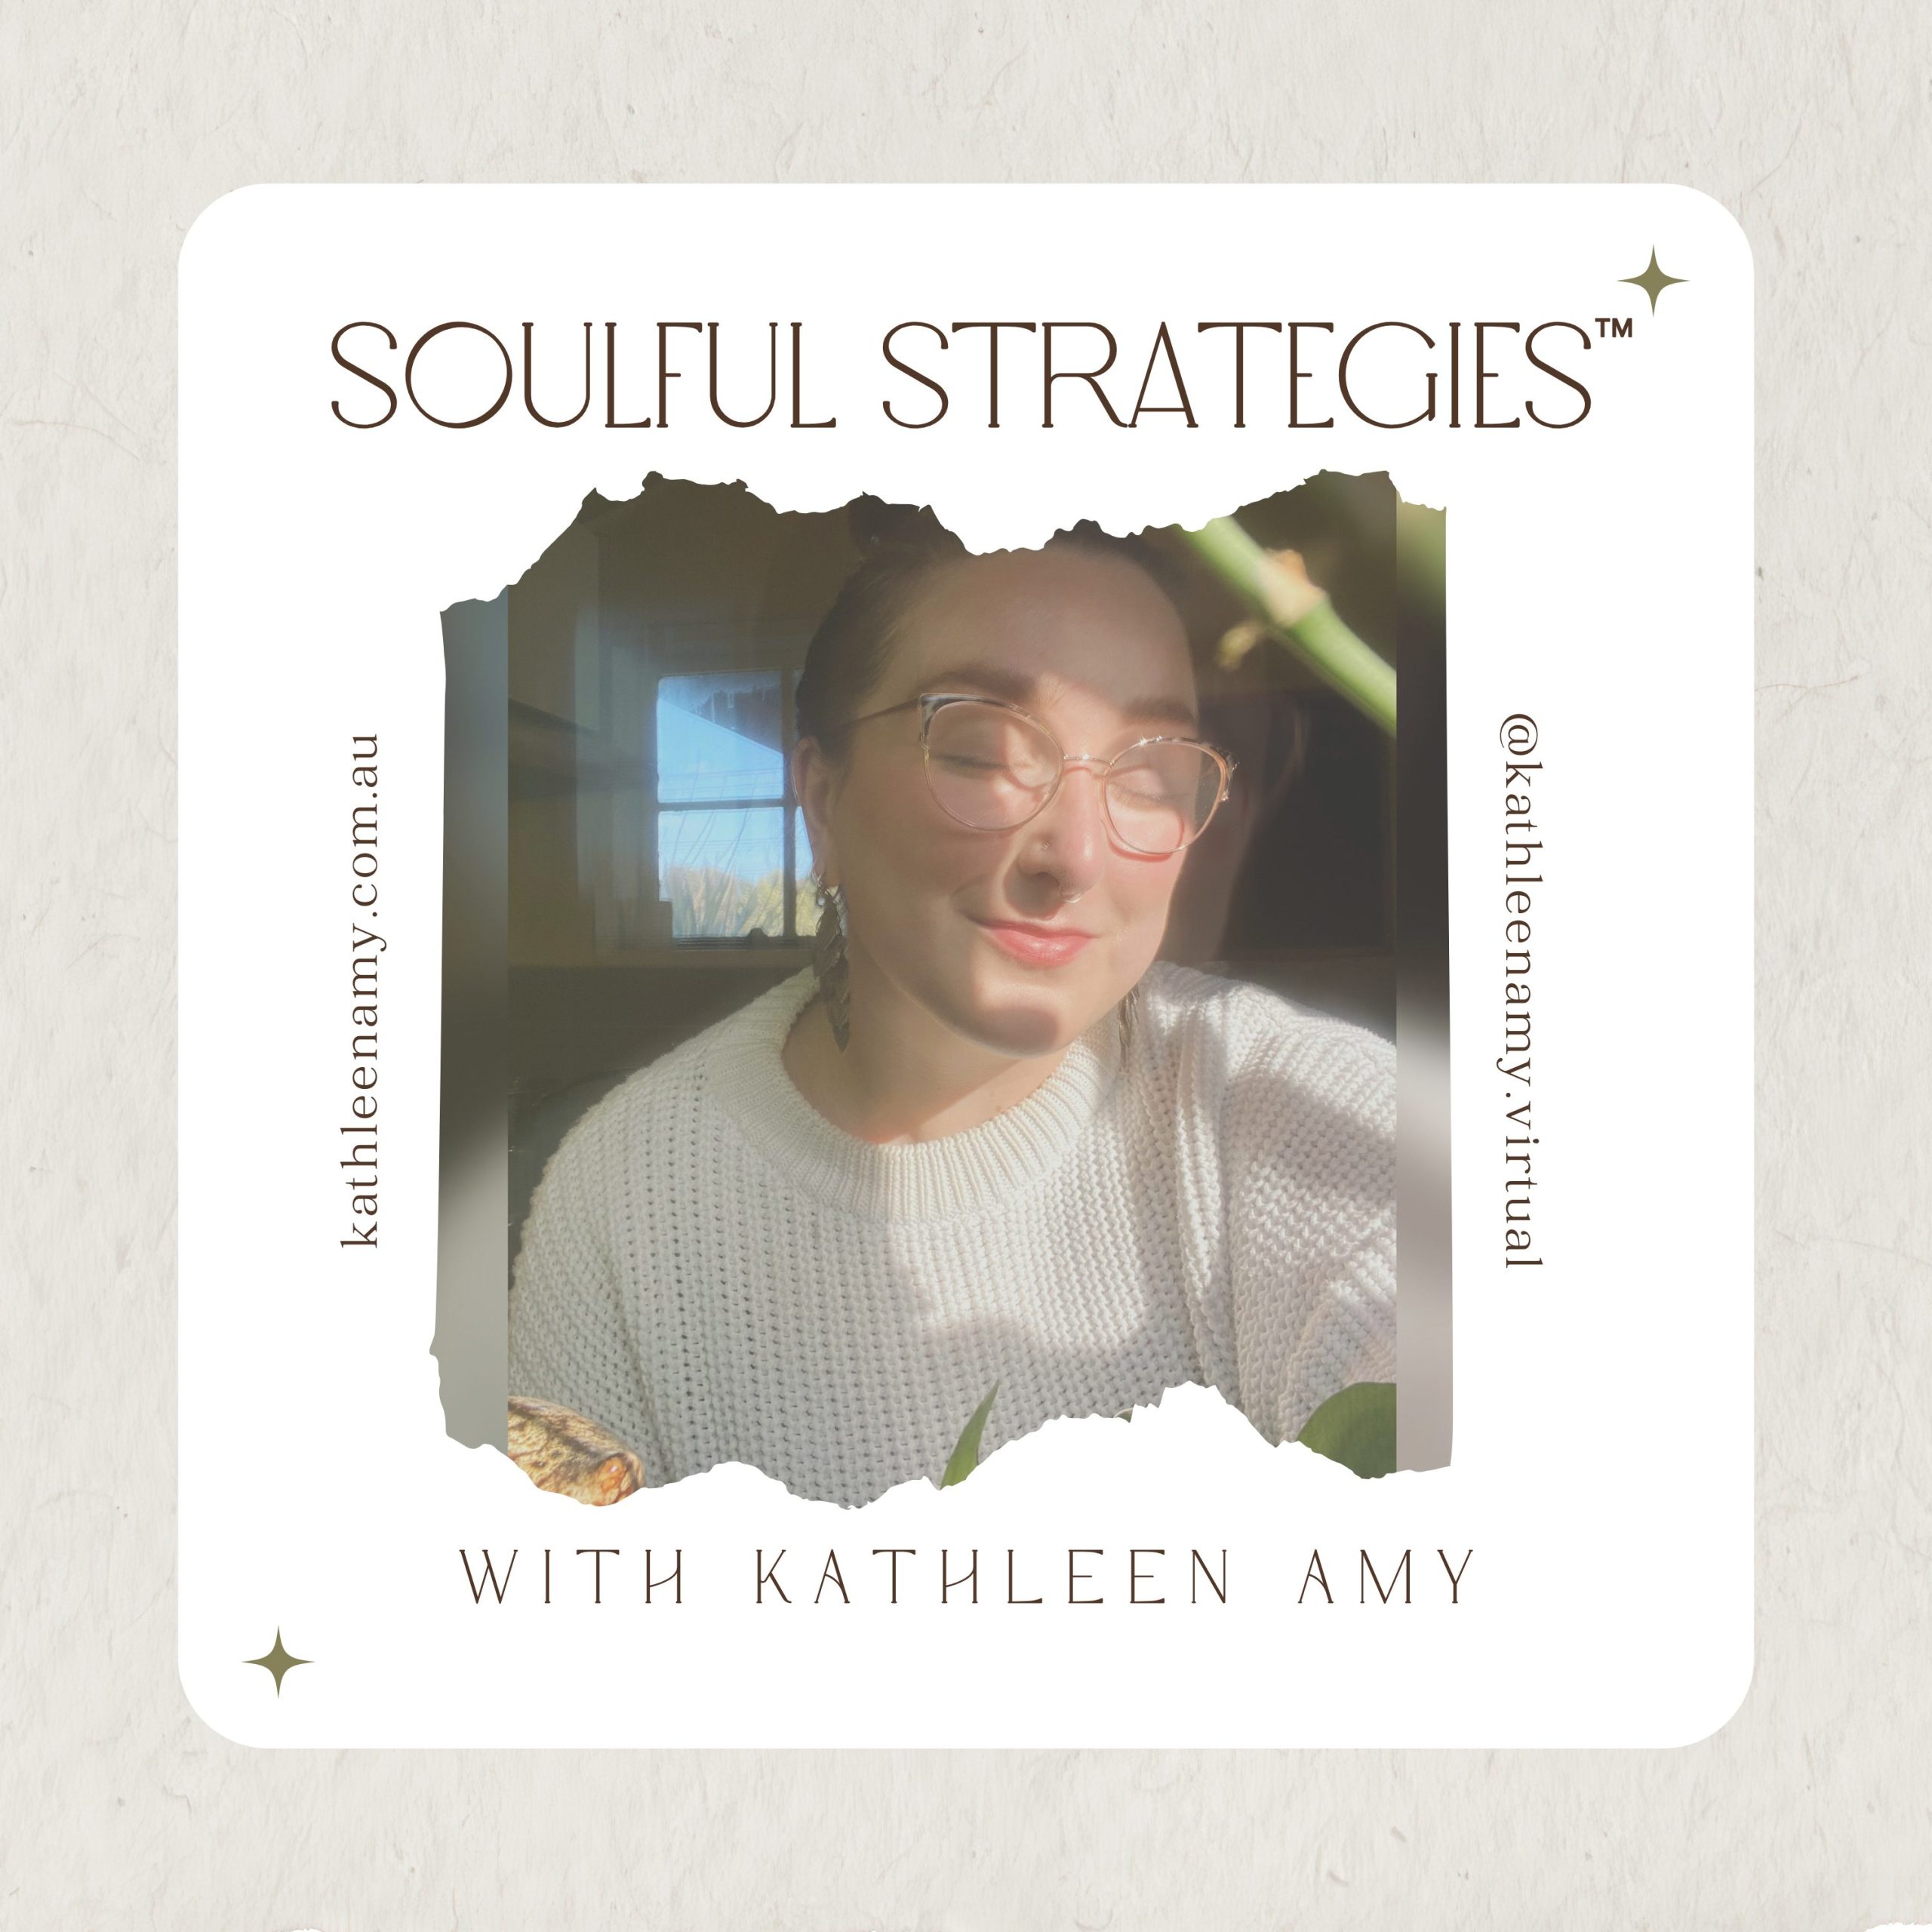 Soulful Strategies with Kathleen Amy .Virtual, creative business podcast, Soulful Business Podcast, Soulful Systems